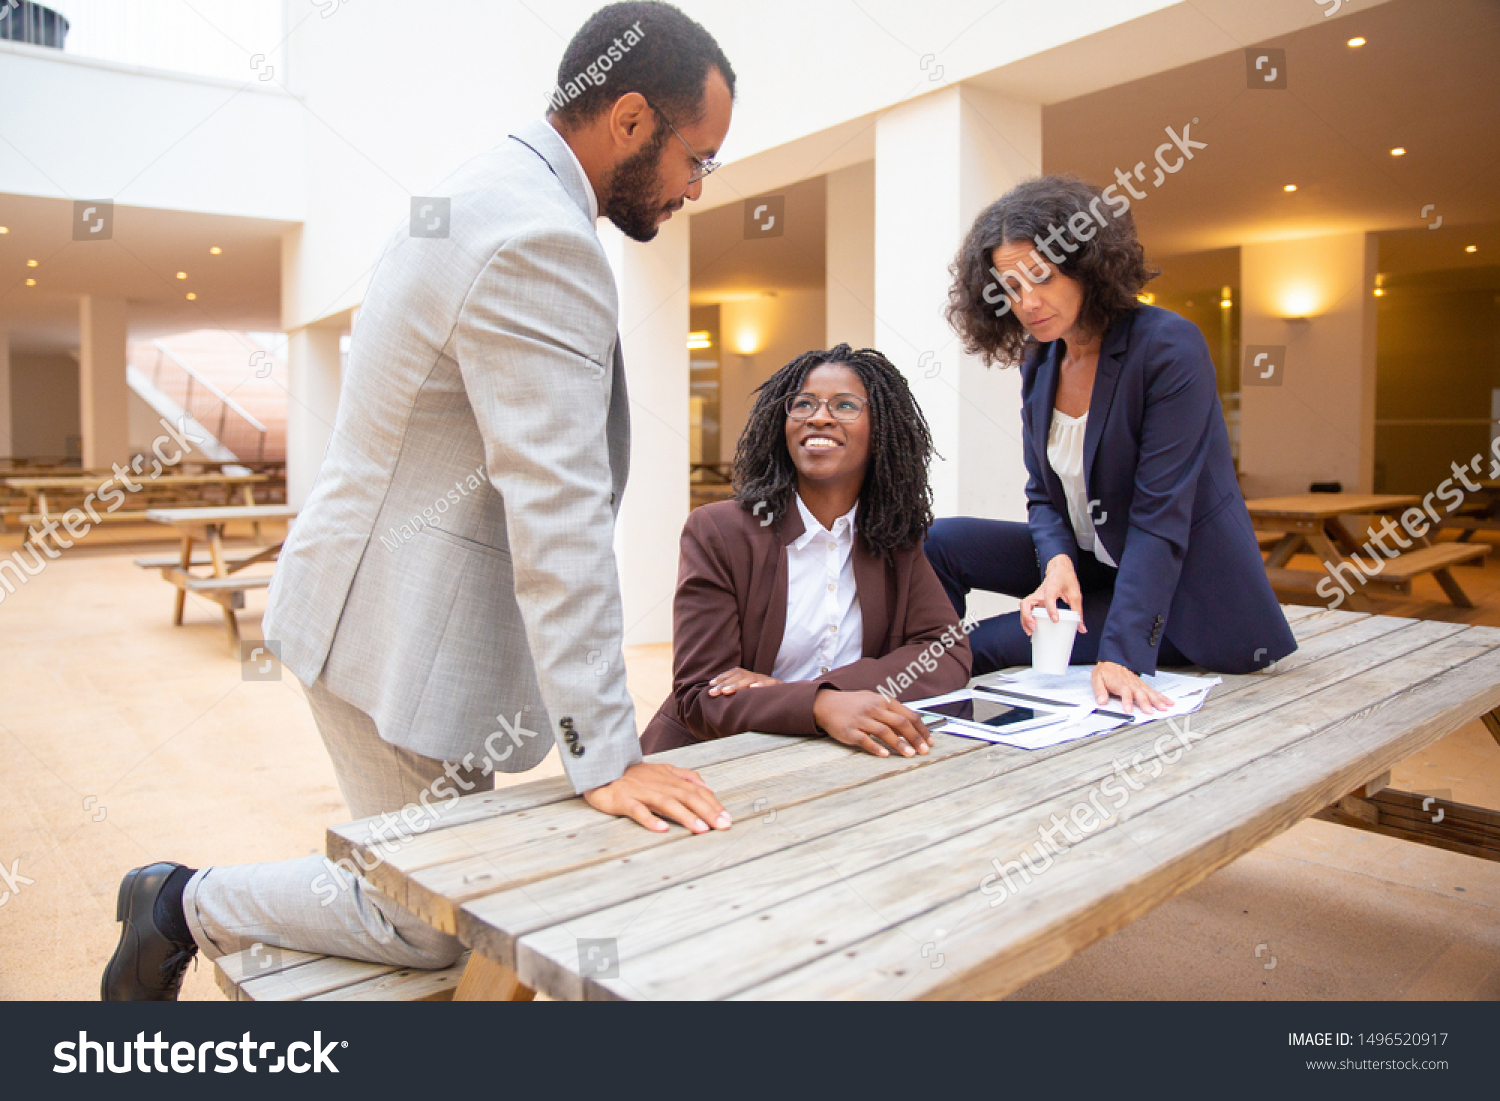 Successful diverse team working on project in outdoor cafe. Business man an women gathering at table with papers and tablet and talking outside. Teamwork outside concept #1496520917